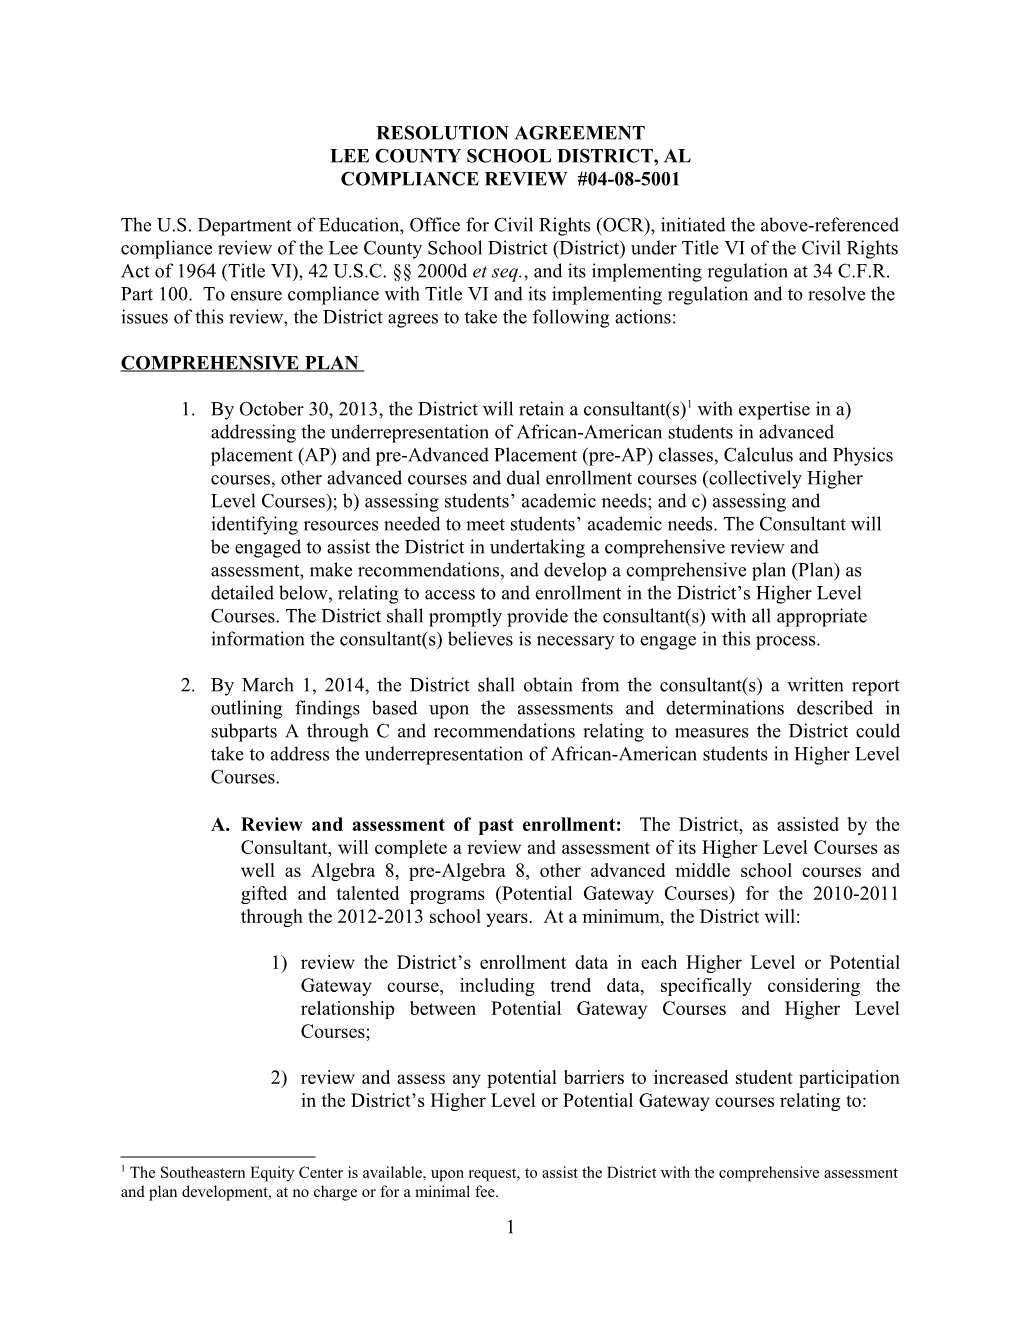 Resolution Agreement Lee County School District, Alabama: Compliance Review #04-08-5001